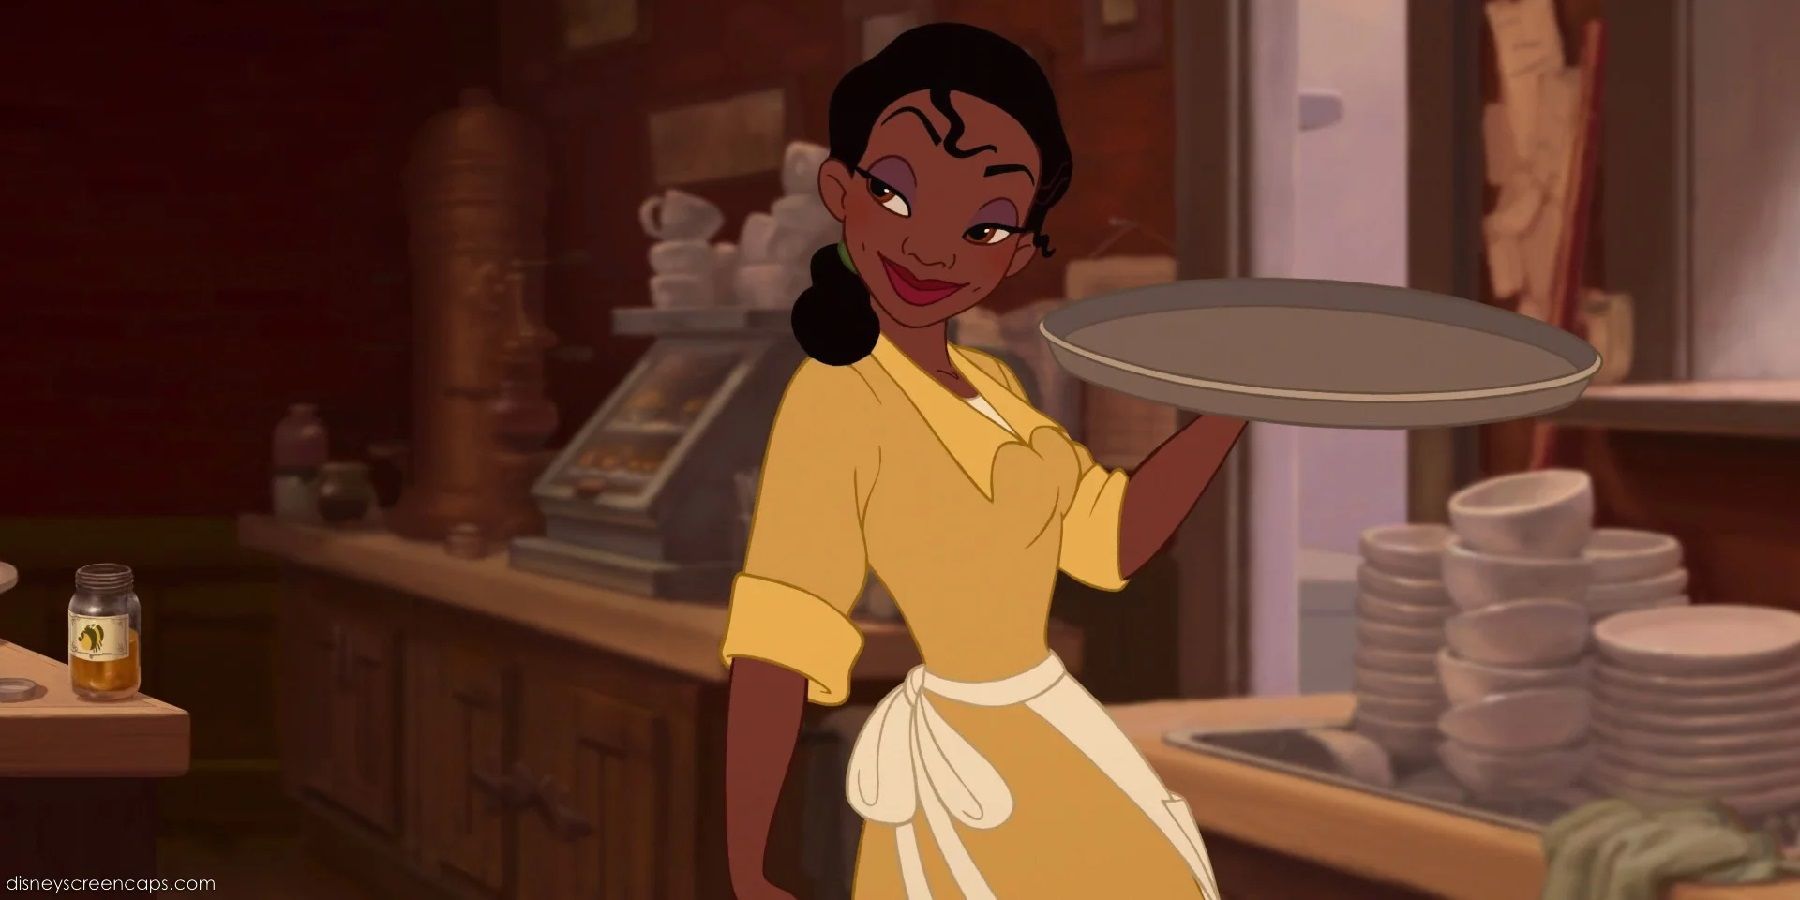 10 Qualities And Characteristics We Want To See In The Next Disney Princess